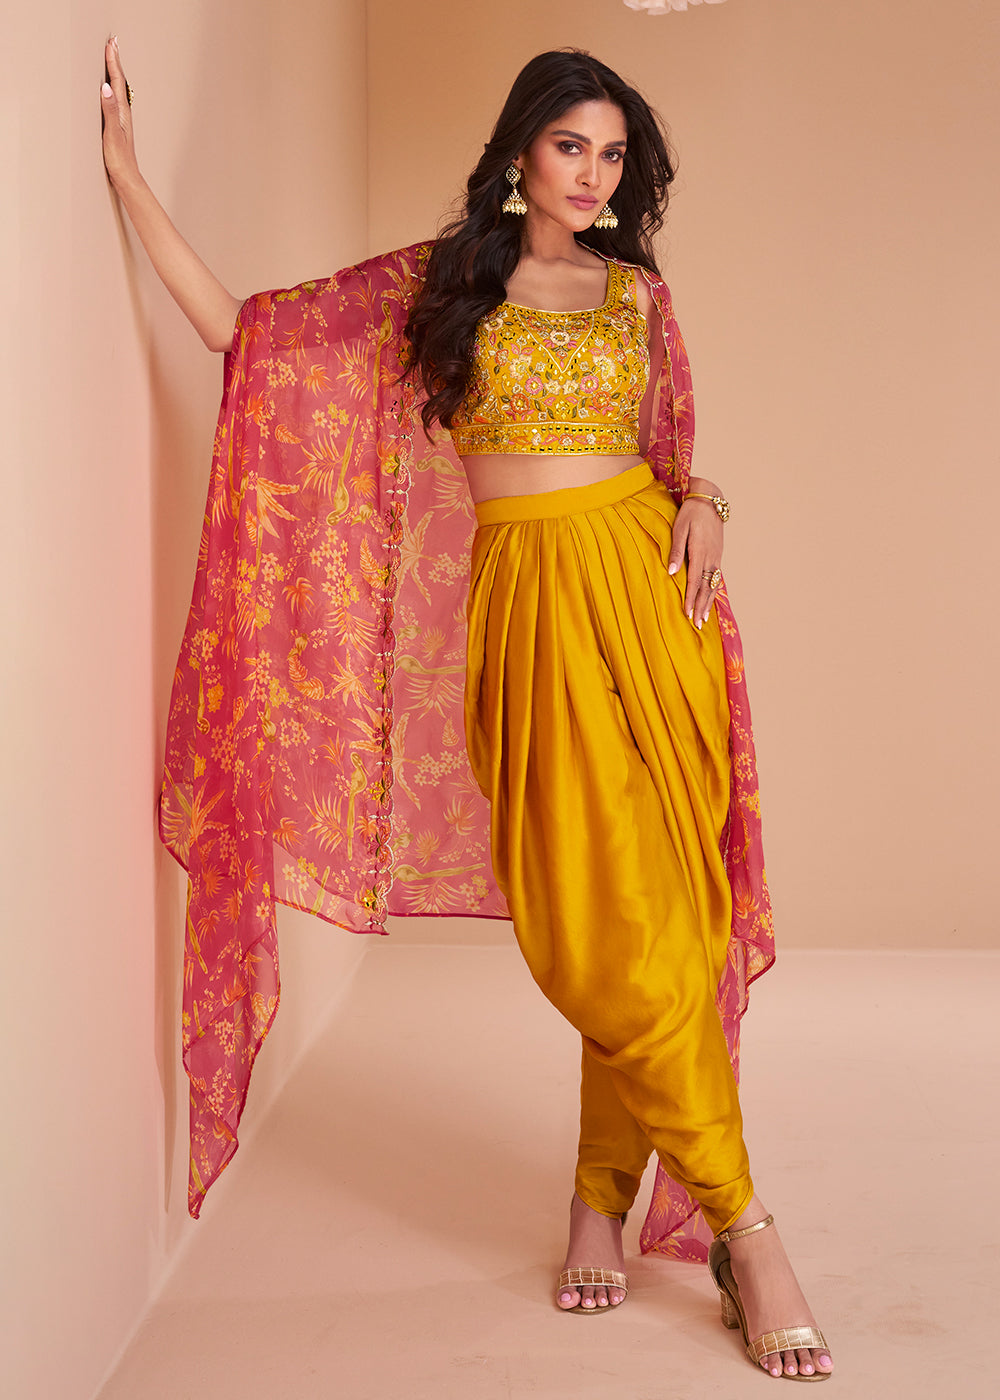 Buy Now Mustard Yellow Satin Silk Indo Western Style Dhoti Pant Suit Online in USA, UK, Canada, Germany, Australia & Worldwide at Empress Clothing.